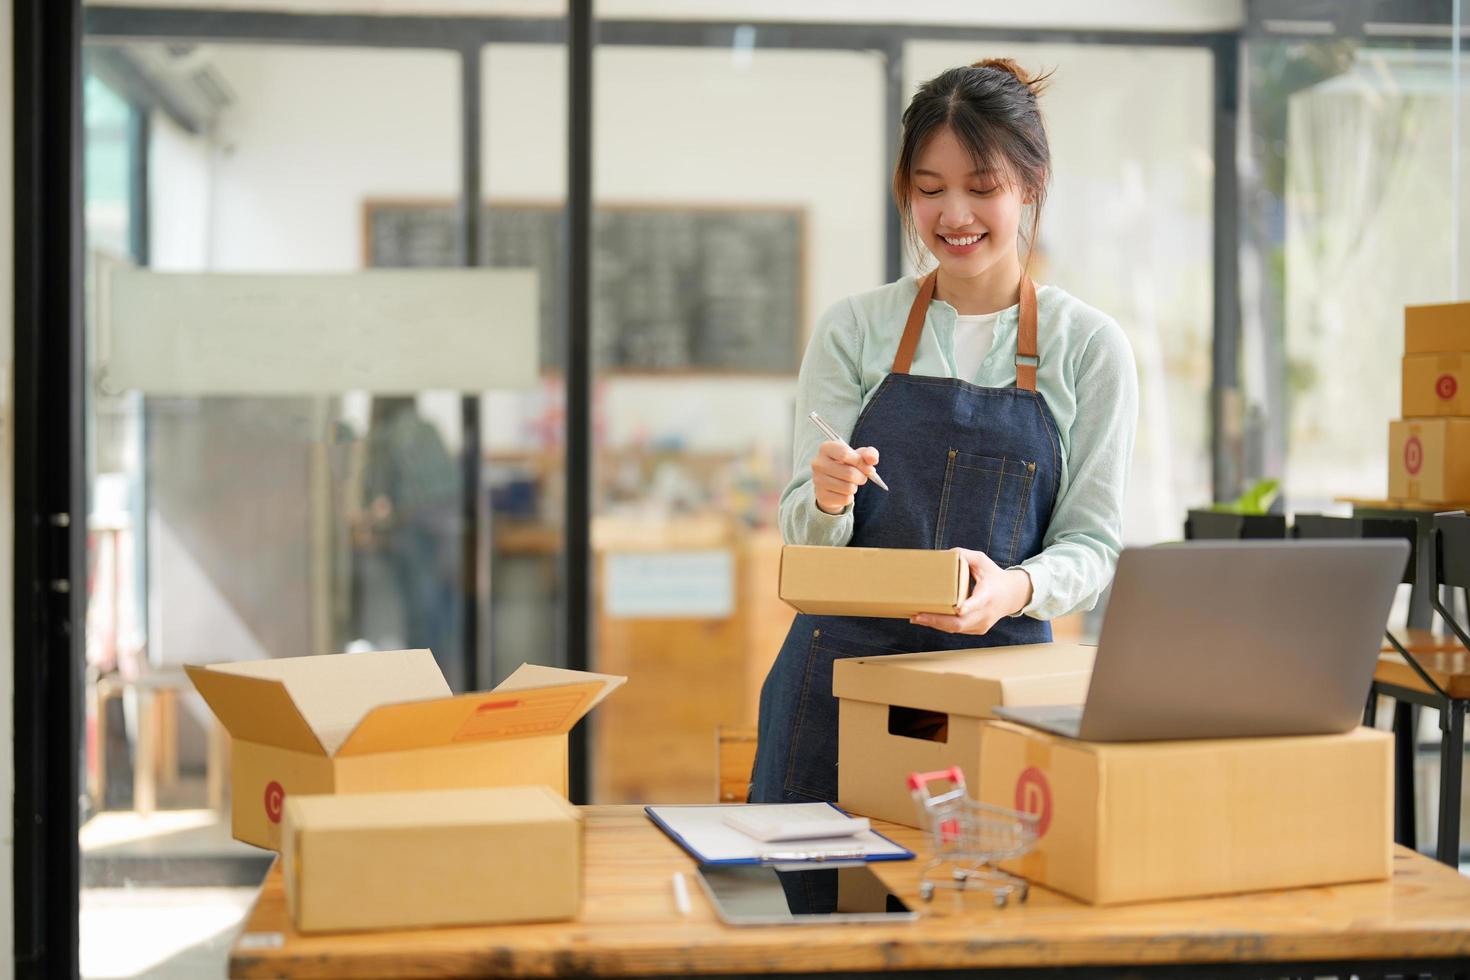 Startup small business SME, Entrepreneur owner using laptop computer taking receive and checking online purchase shopping order to preparing pack product box. Selling online ideas concept photo